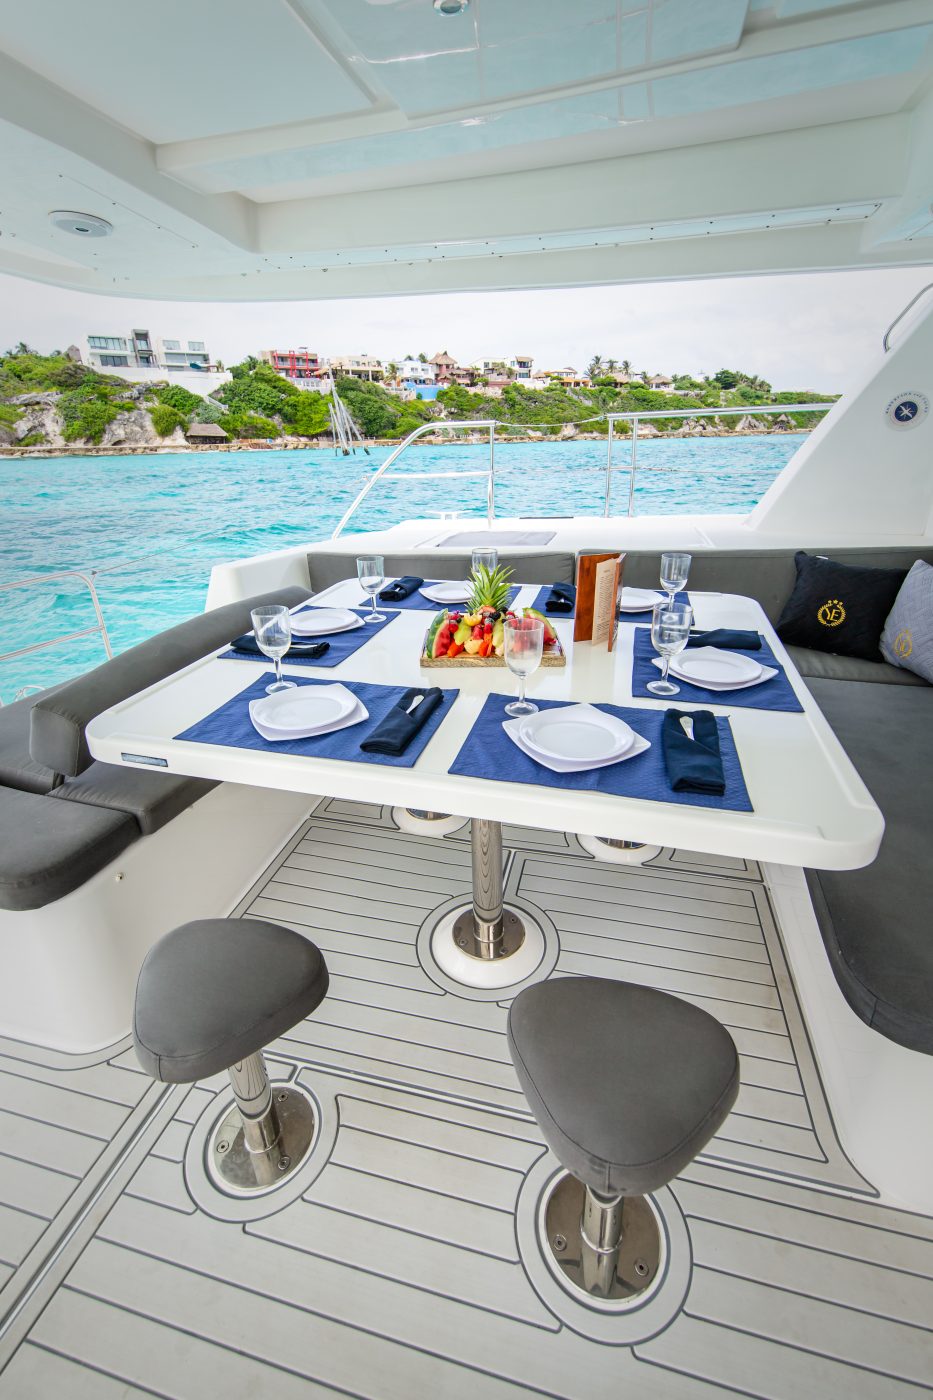 Leopard Catamaran for Luxury Yacht Charters from Cancun all inclusive